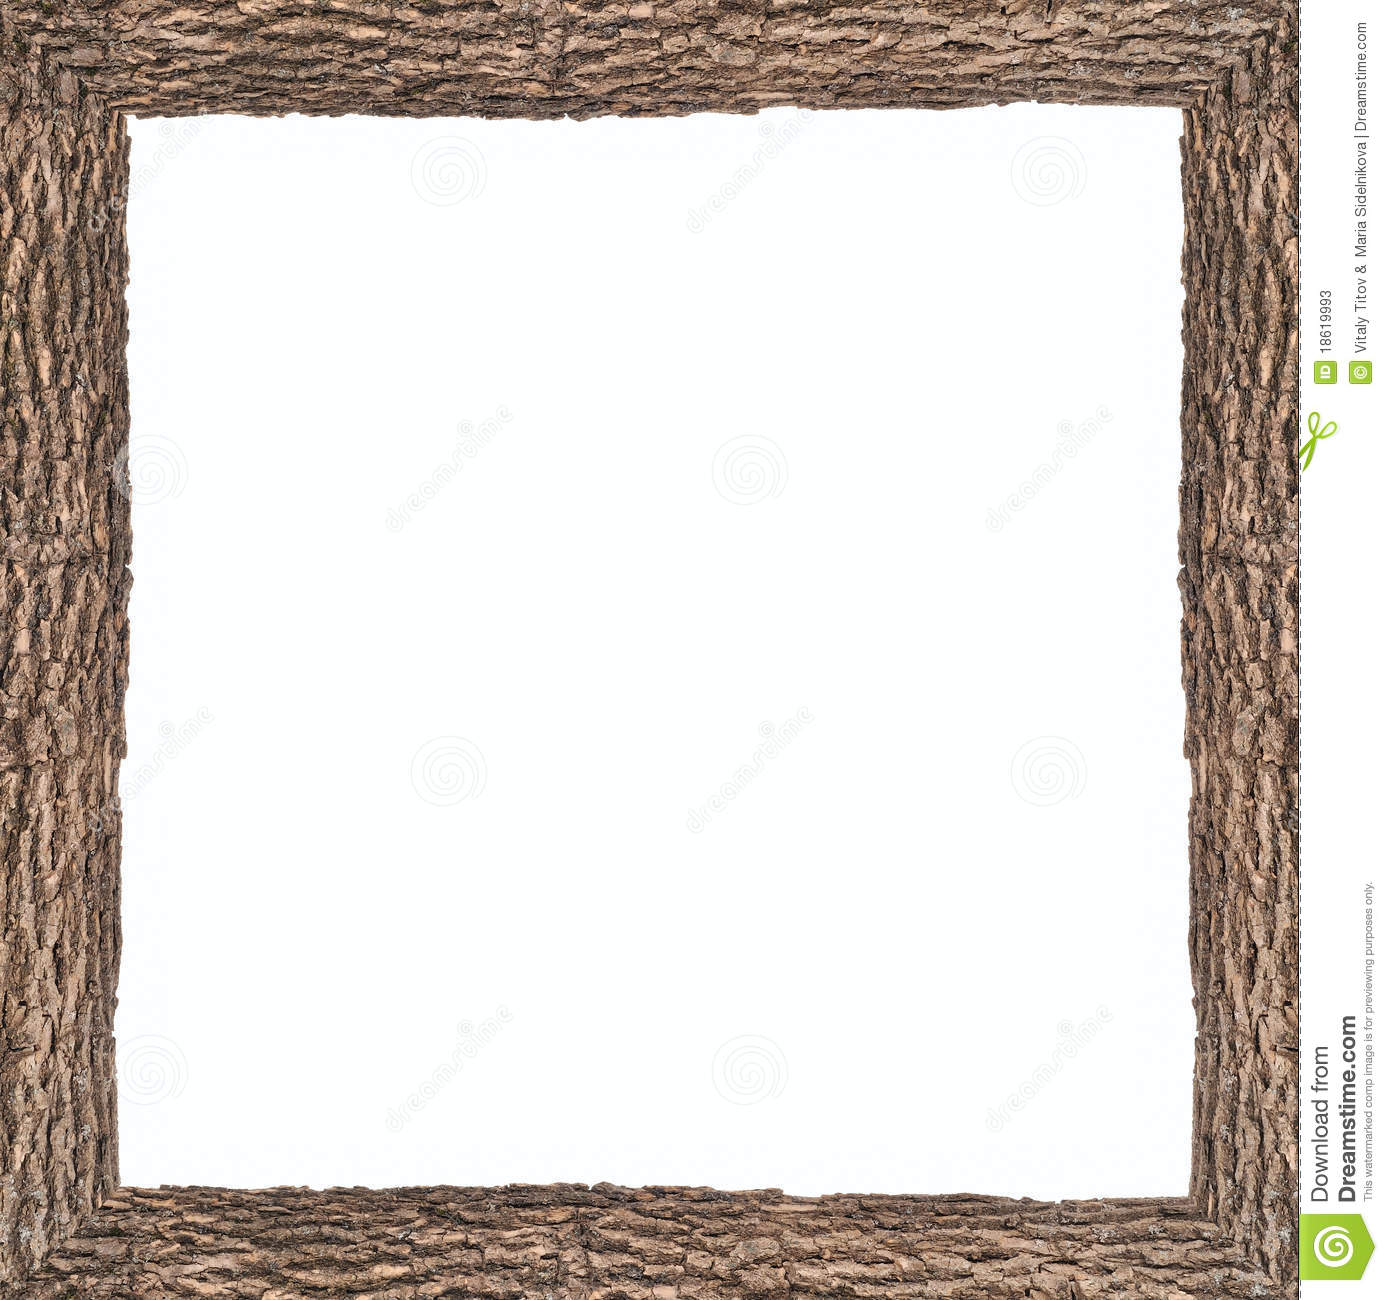 Square Frame Clipart Square Frame With Wooden Bark